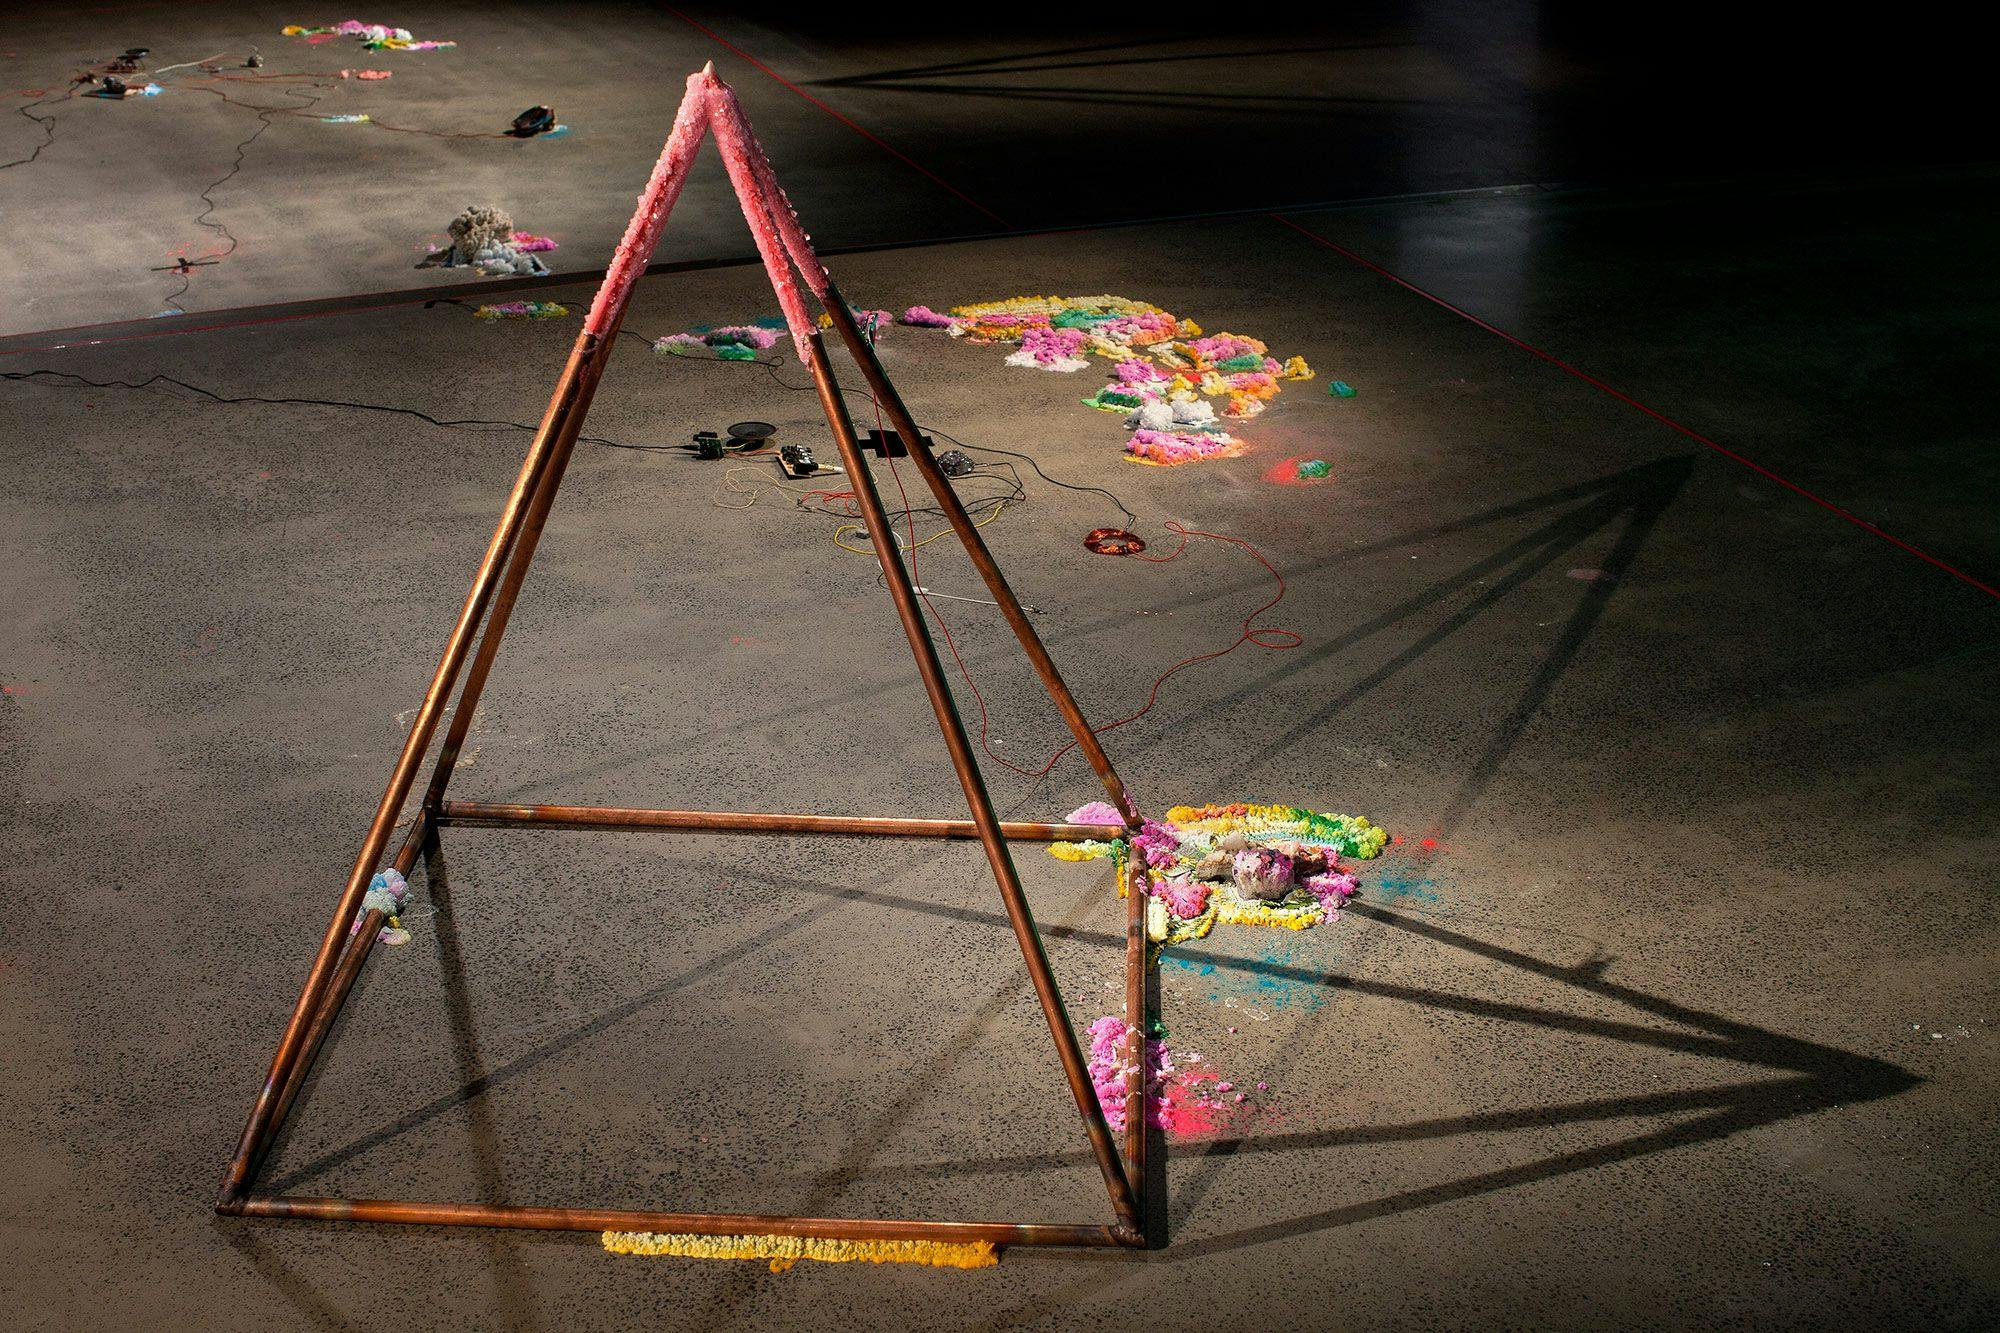 A pyramid casting shadows with brightly covered elements on and around